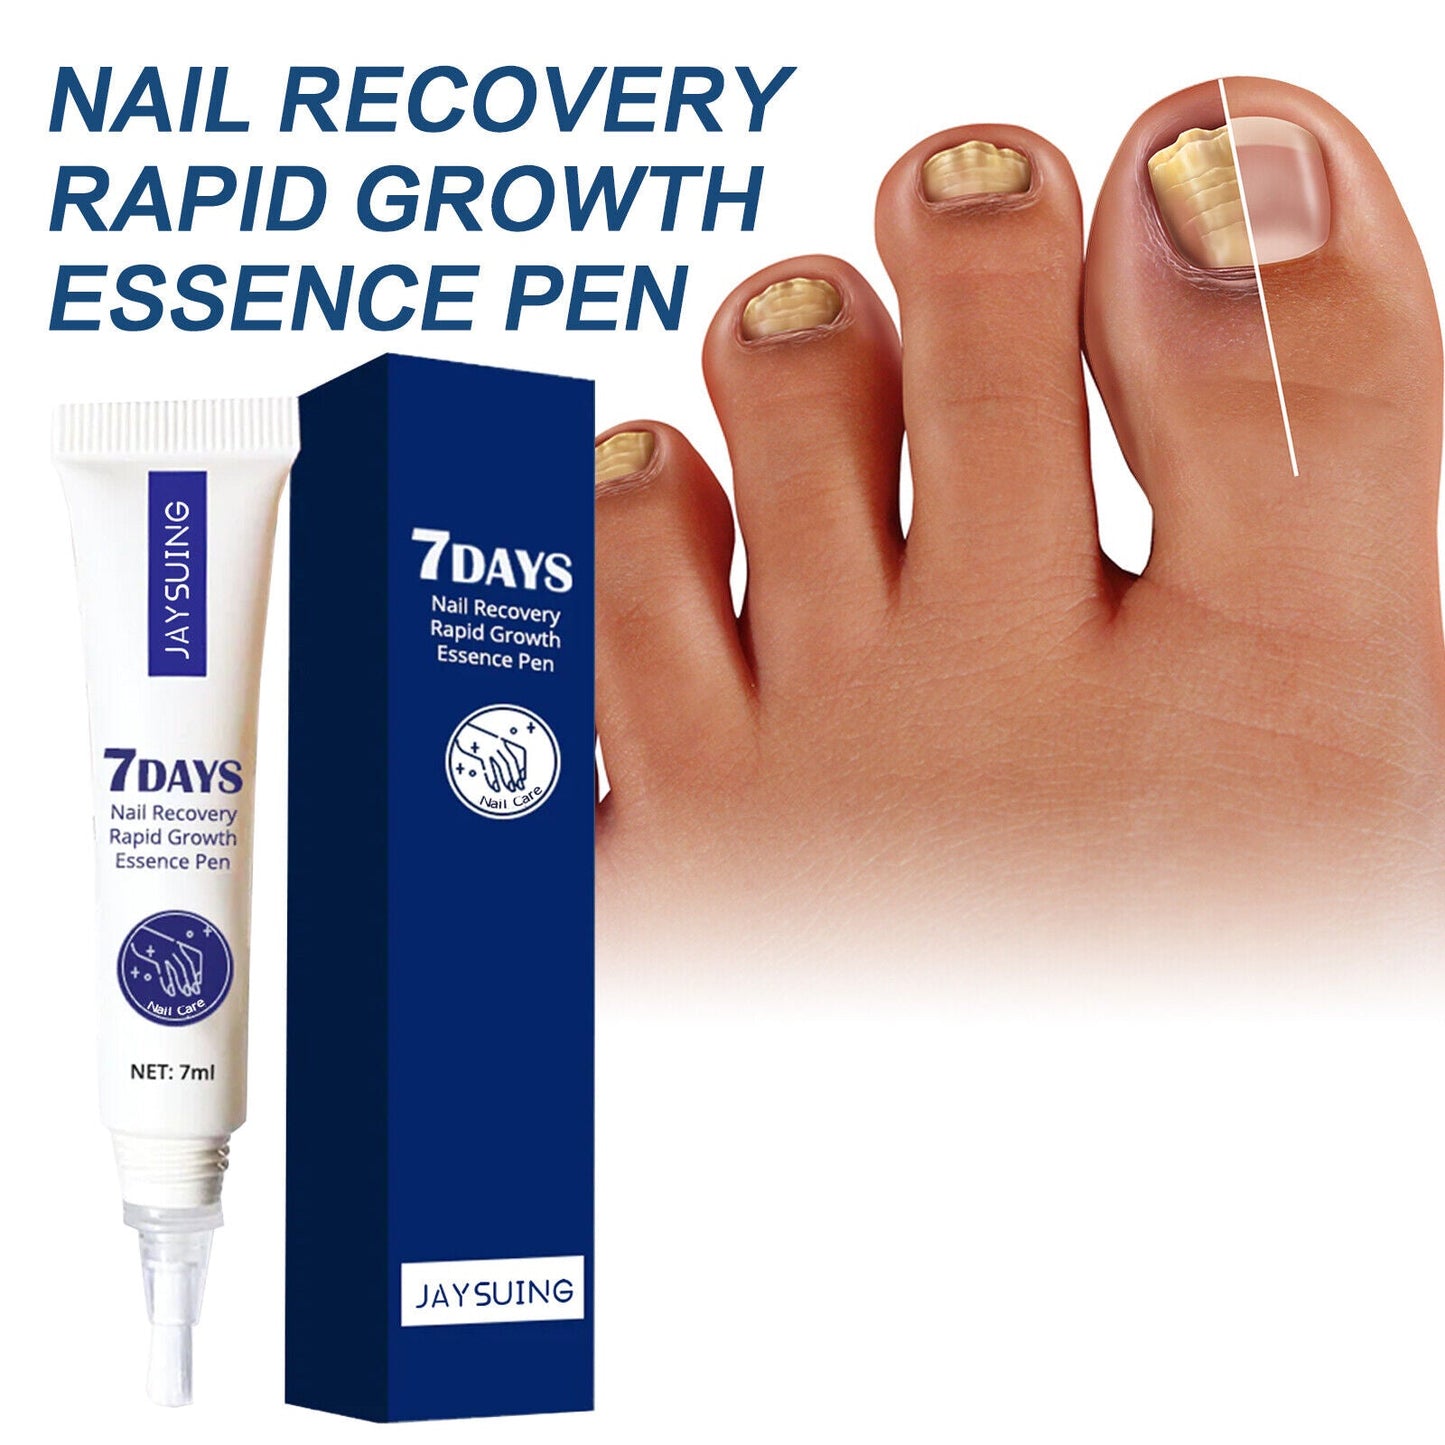 7 Days Nail Recovery Rapid Growth Essence Pen